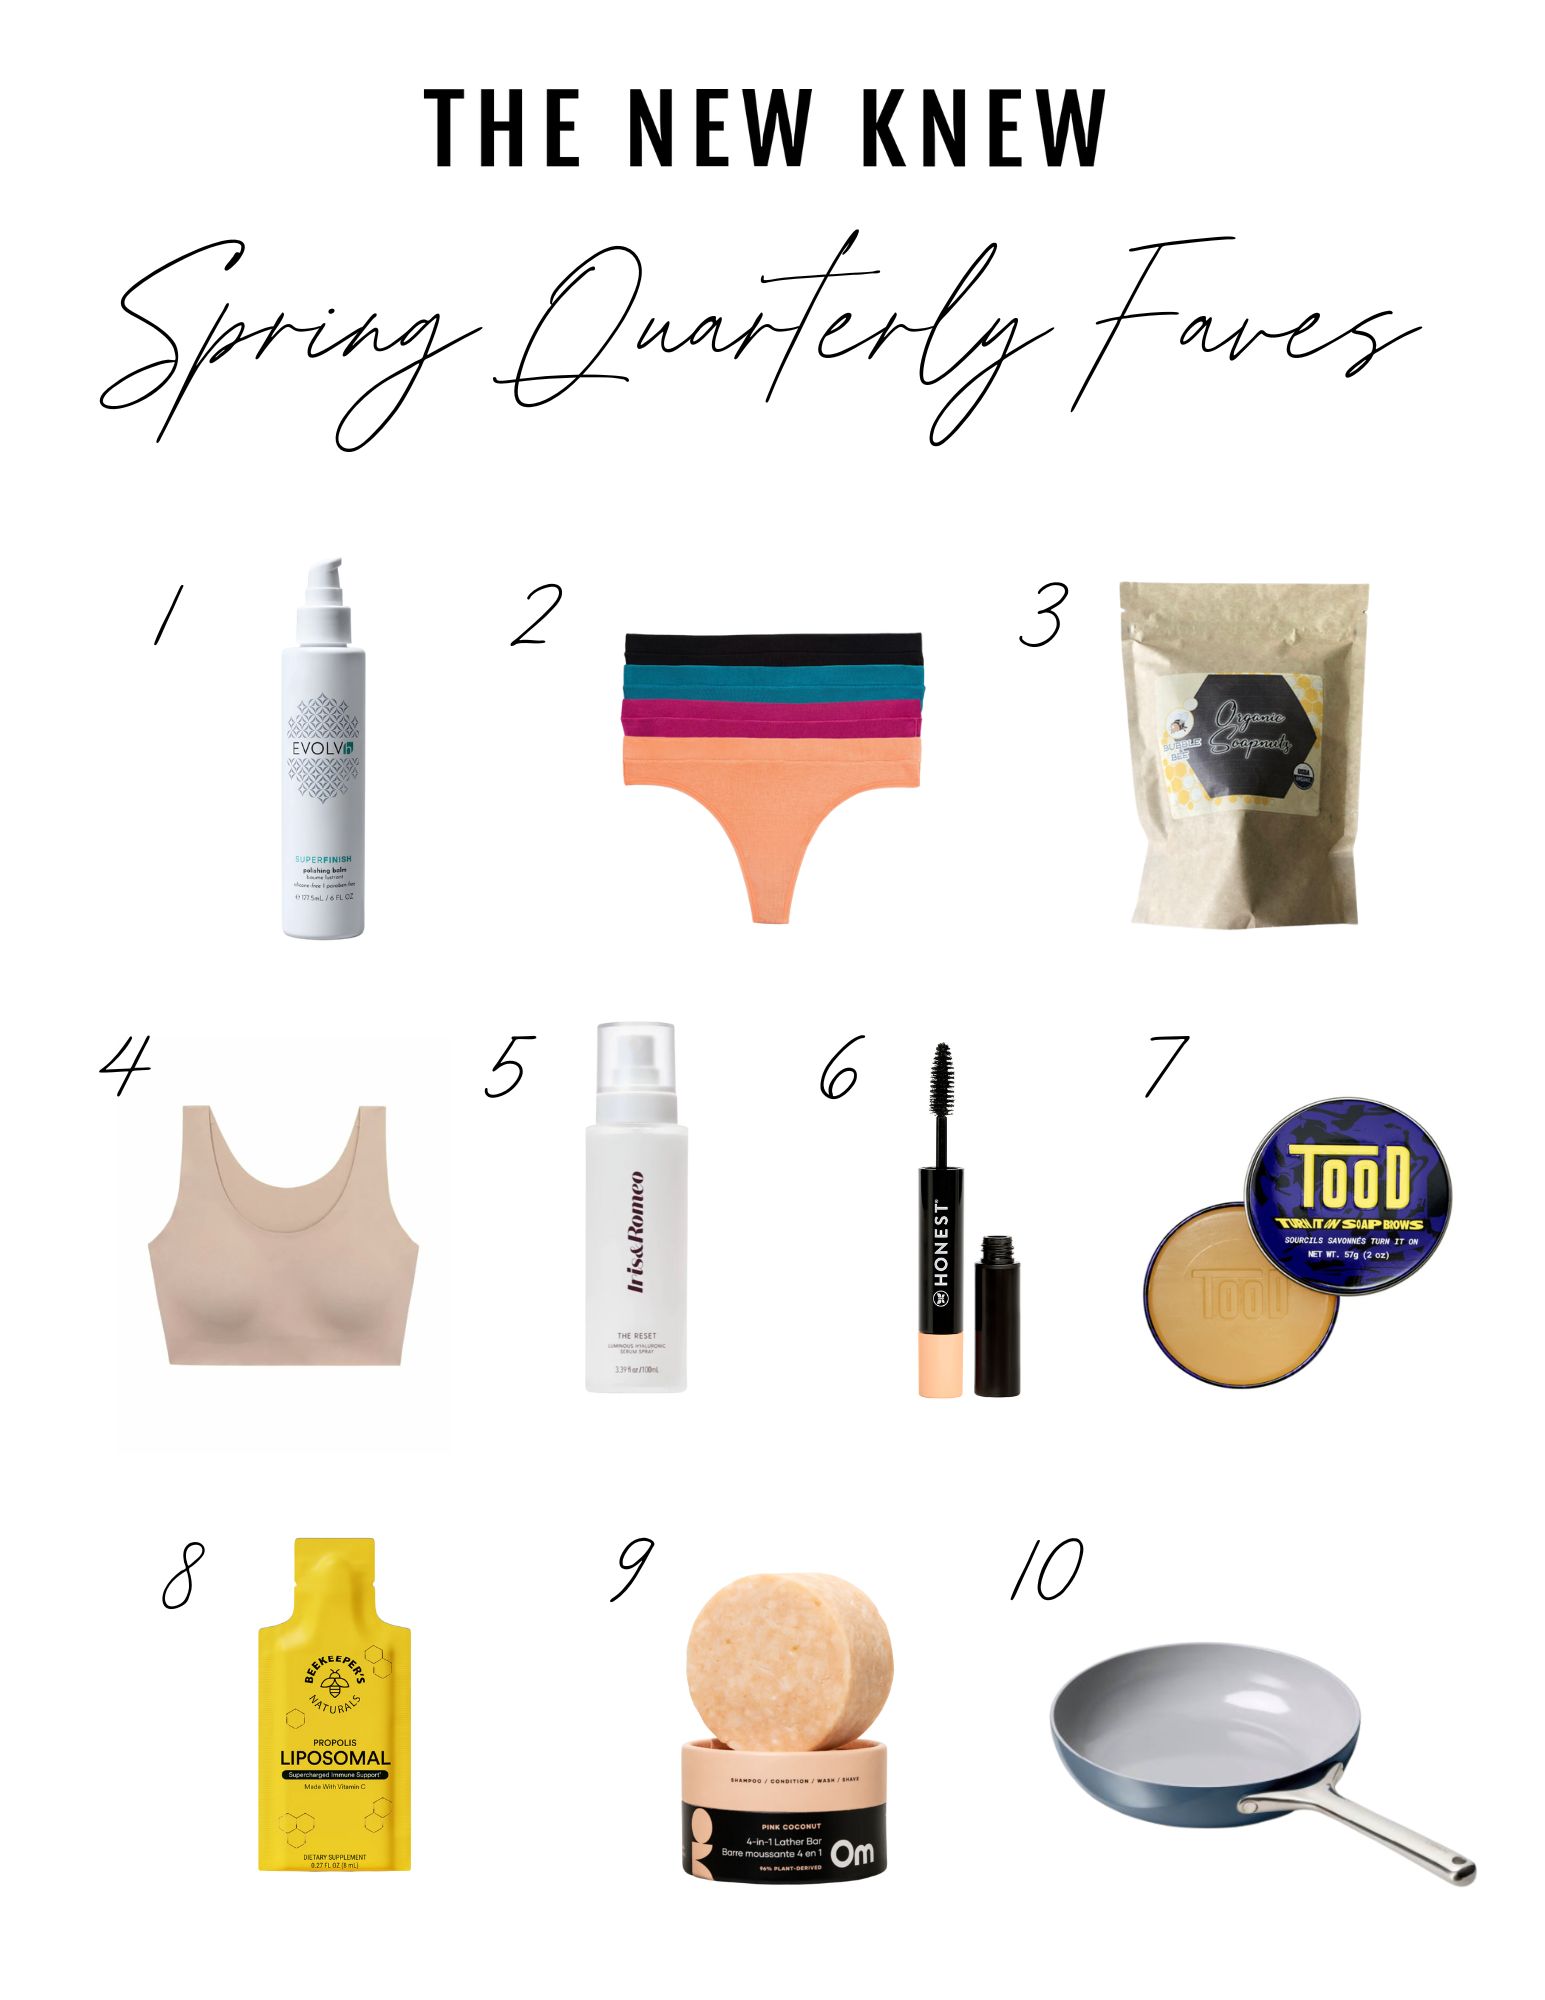 A collection of 10 products that are TNK's spring quarterly favorite product picks.